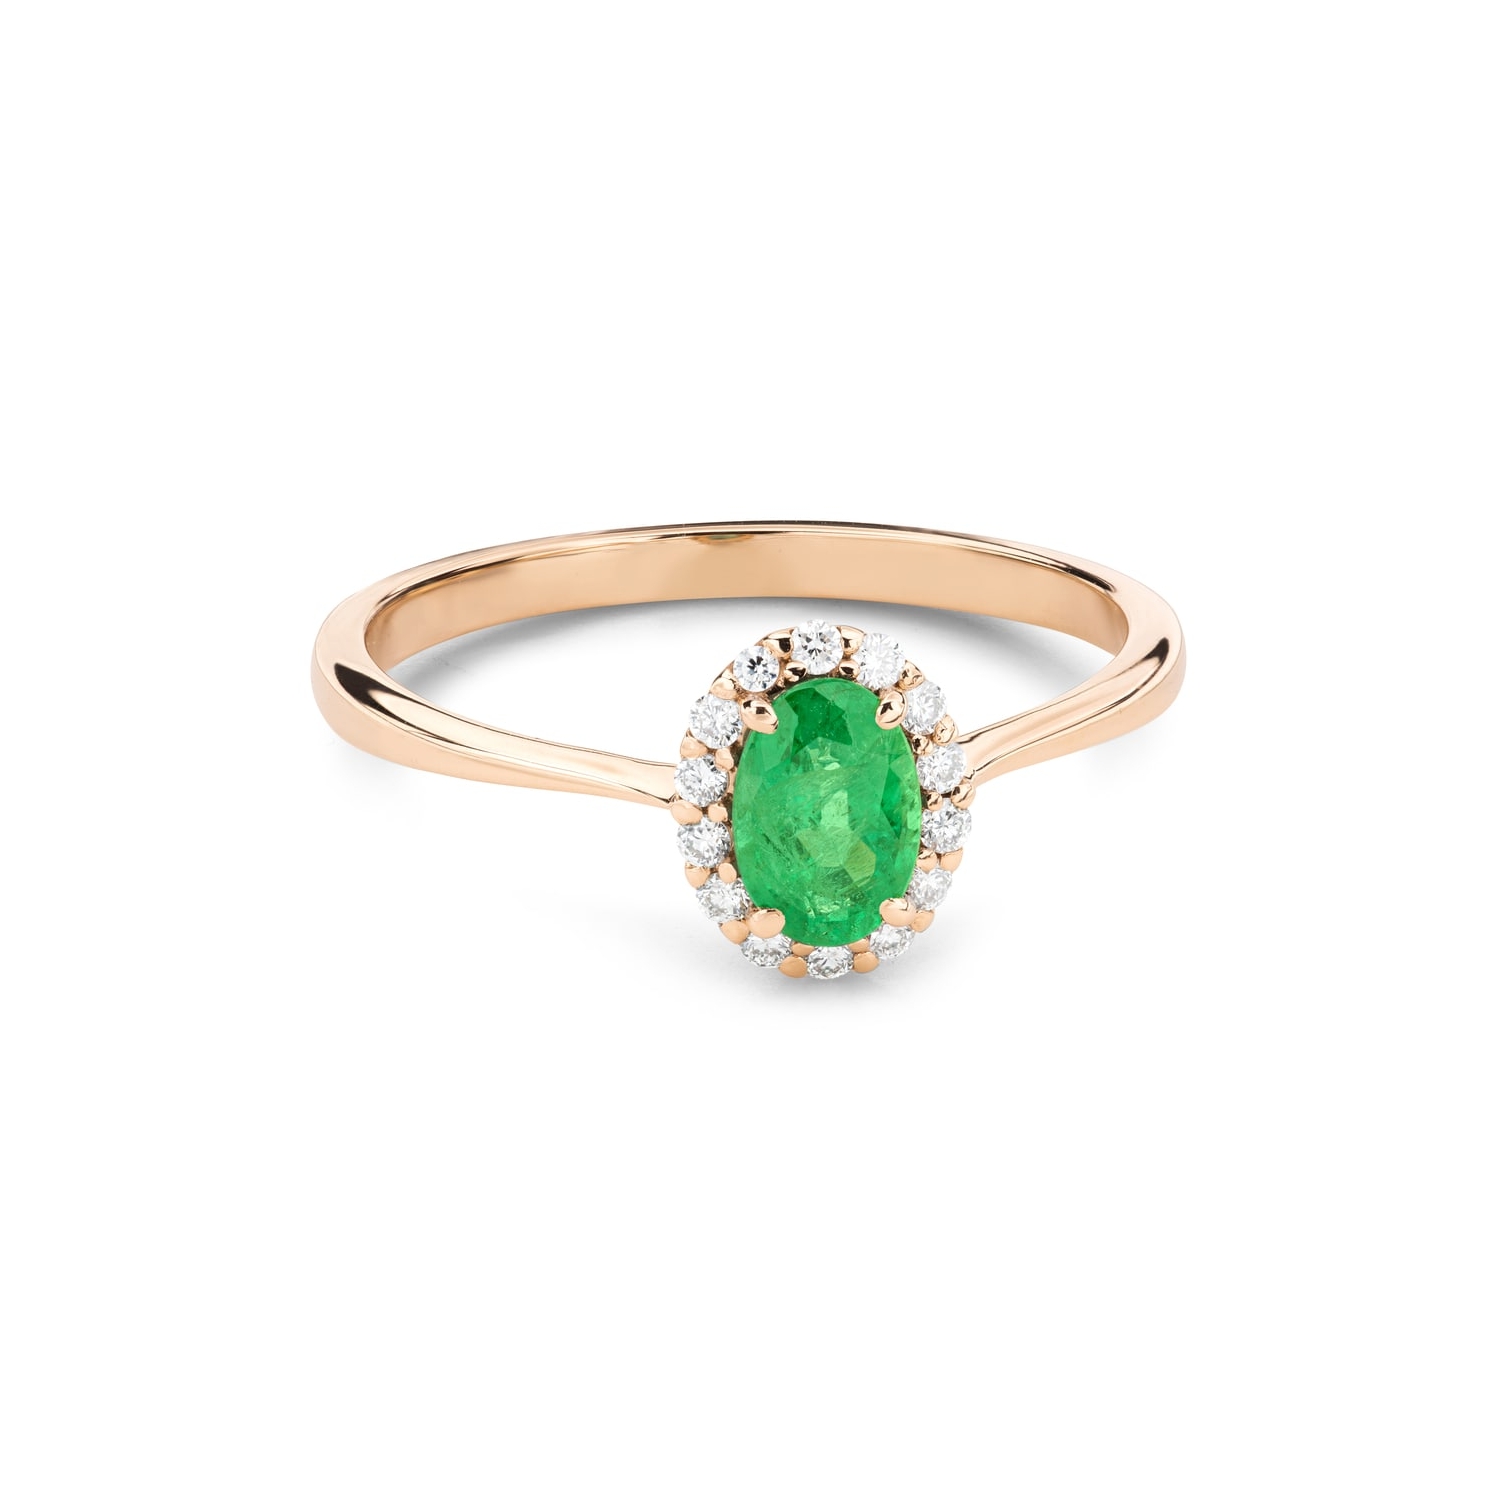 Gold ring with gemstones "Emerald 65"